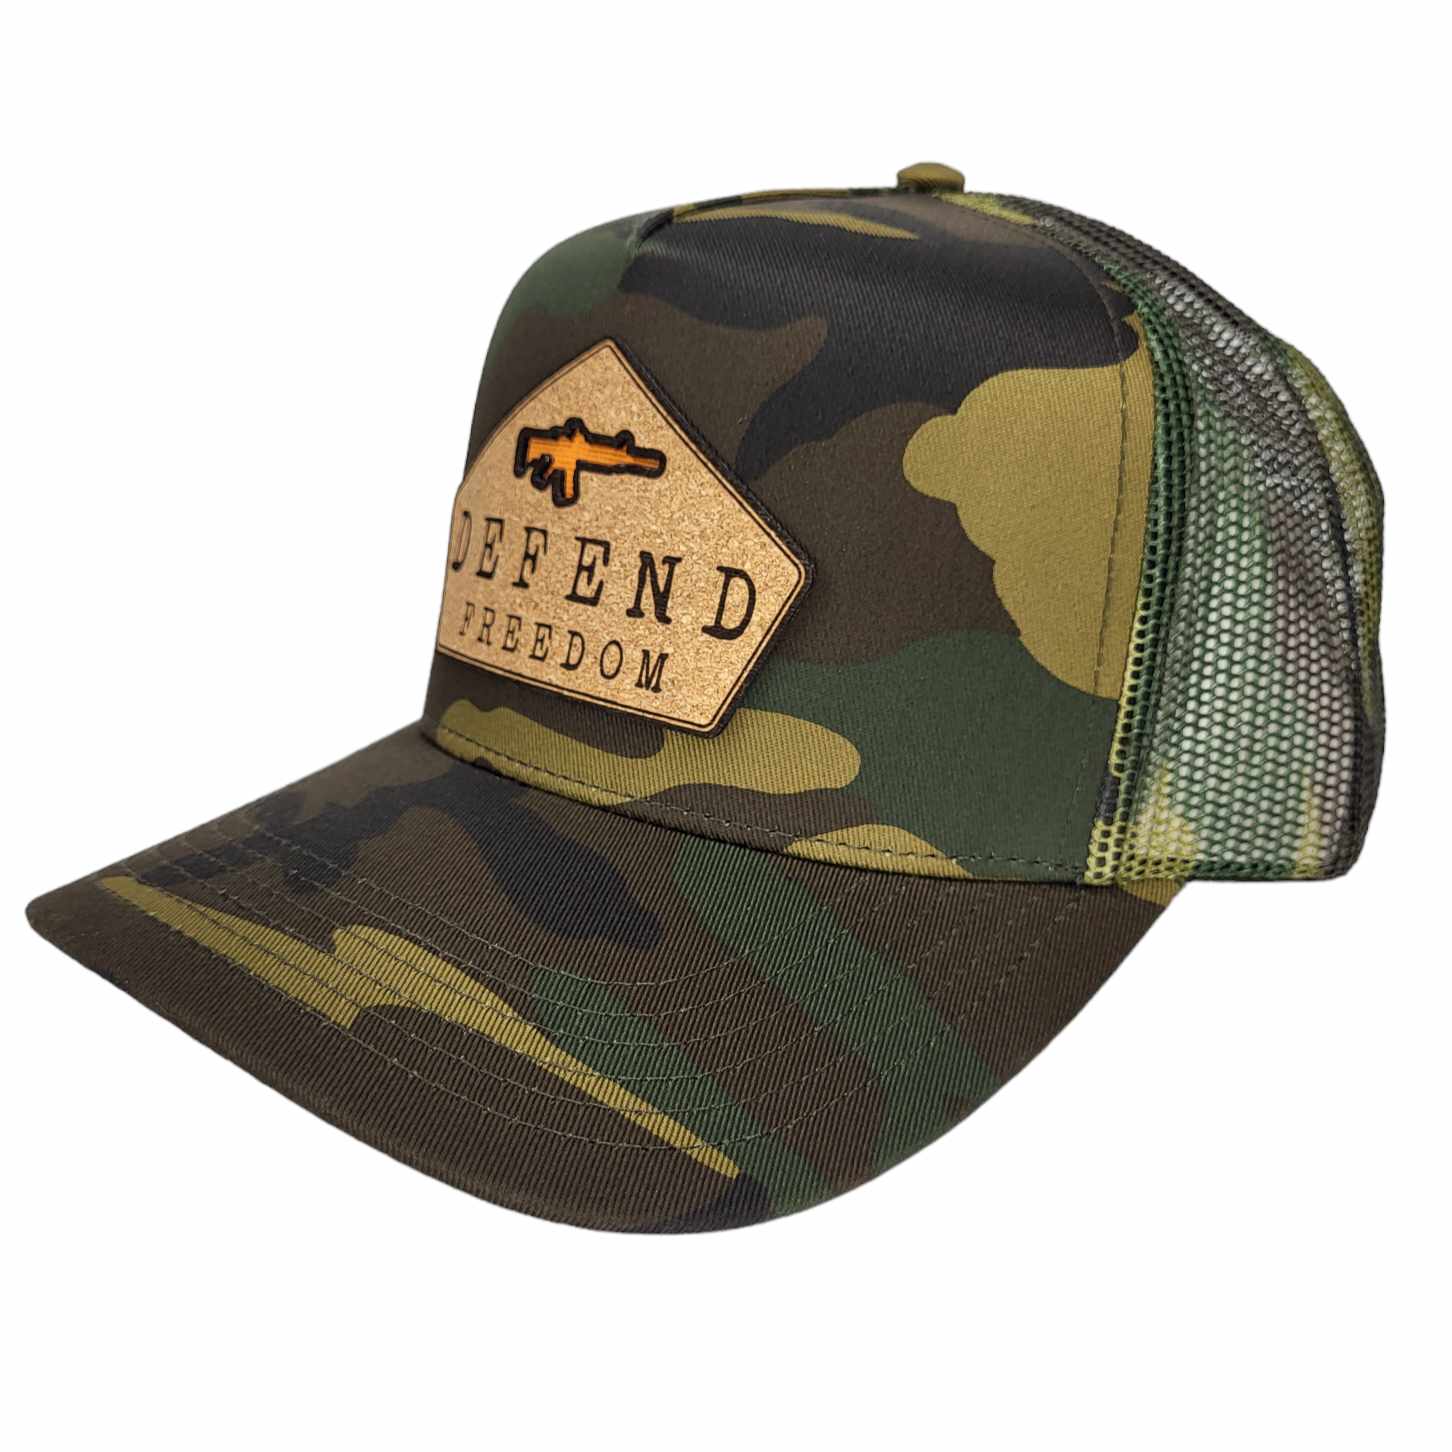 Defend Freedom Cork Patch Hat